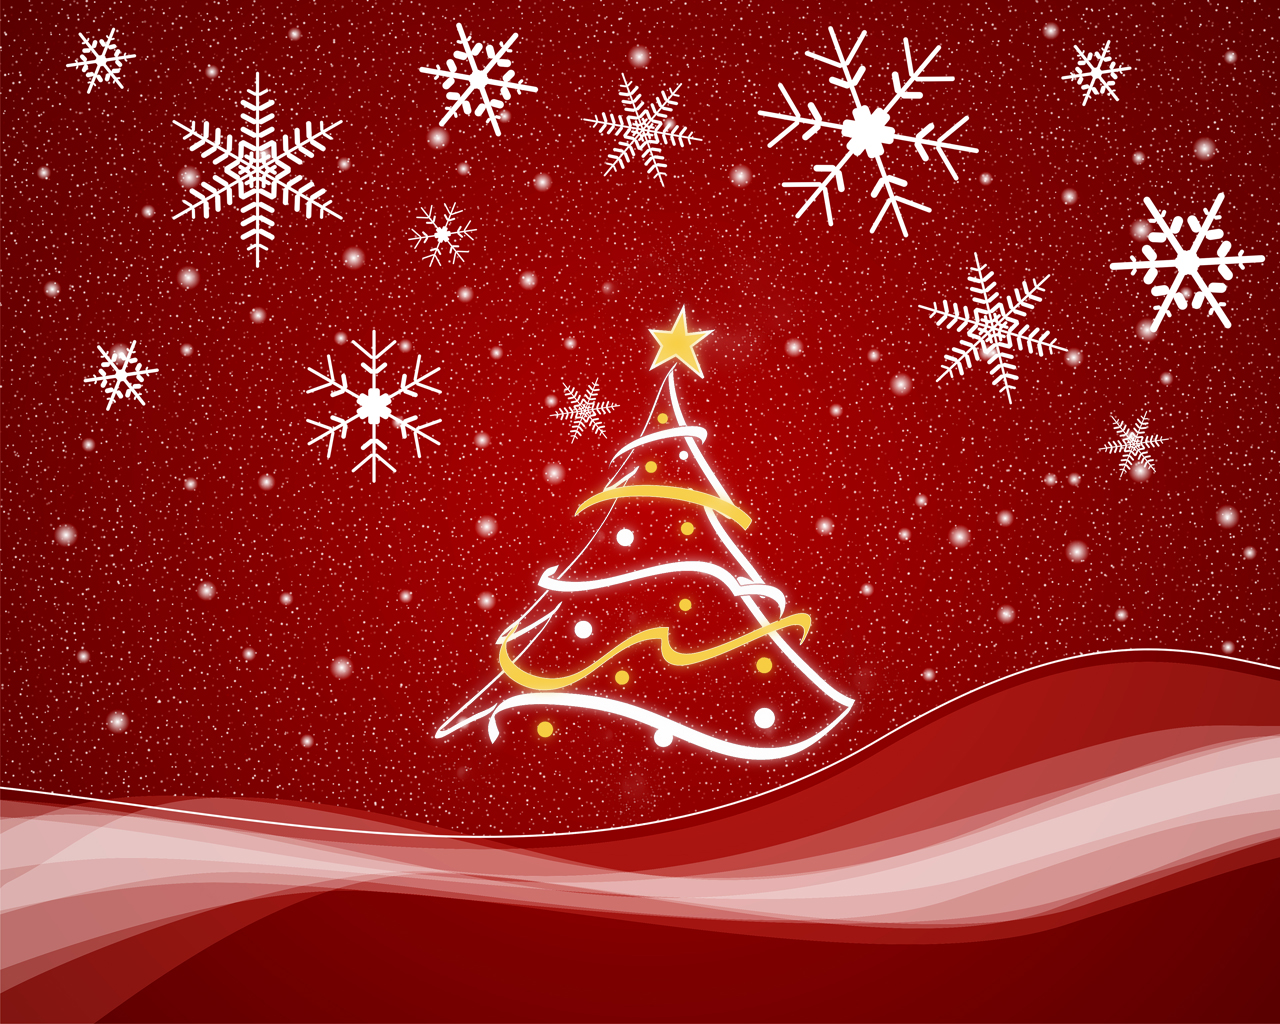  textures, New Year, Christmas texture, Christmas and New Year tree texture background, 